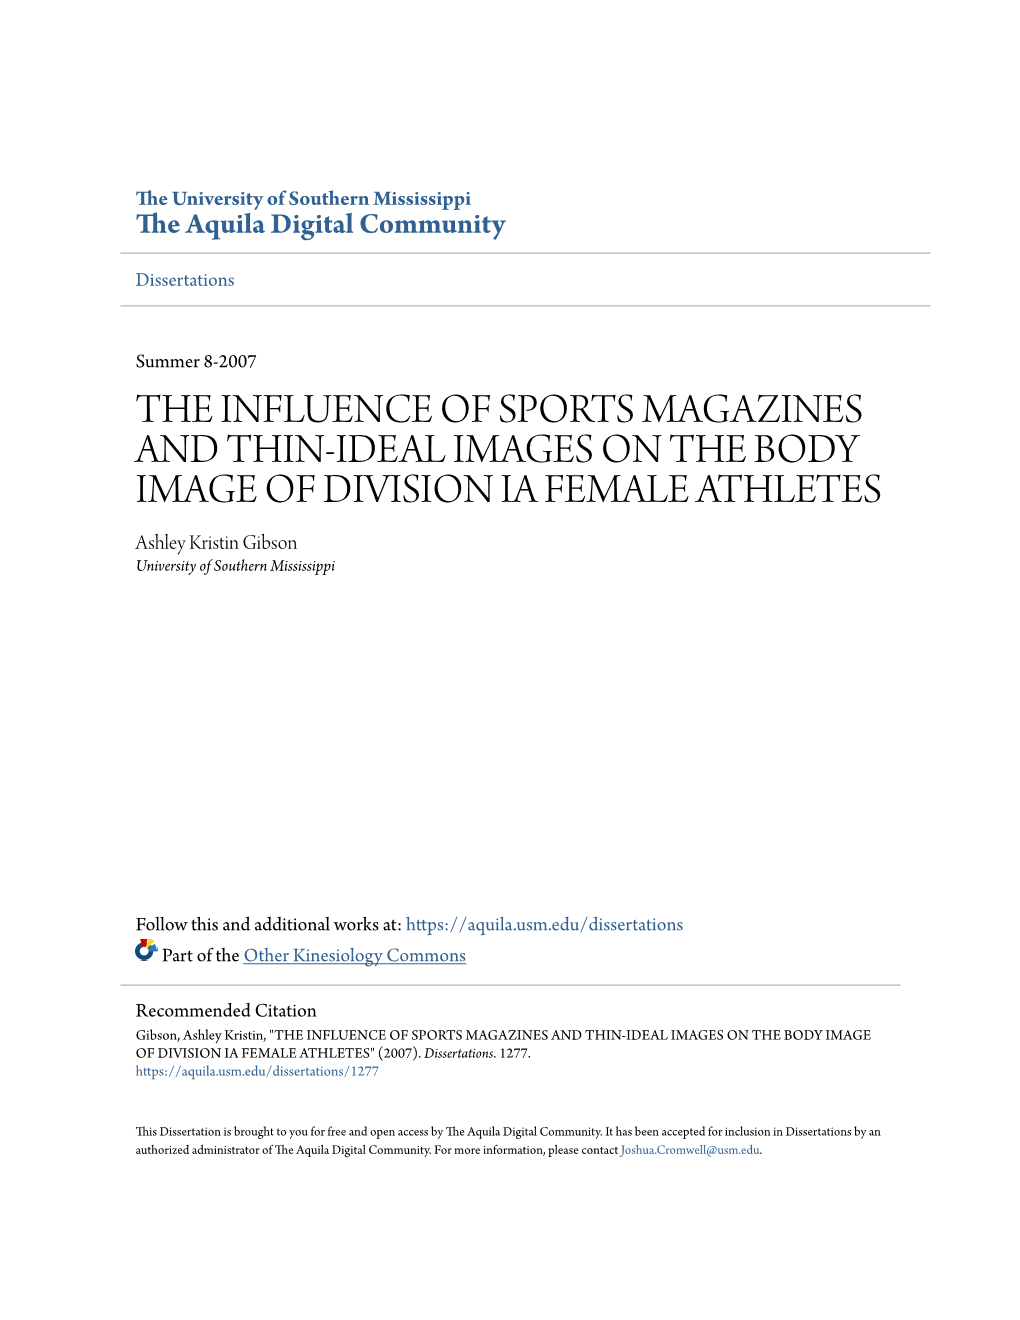 THE INFLUENCE of SPORTS MAGAZINES and THIN-IDEAL IMAGES on the BODY IMAGE of DIVISION IA FEMALE ATHLETES Ashley Kristin Gibson University of Southern Mississippi